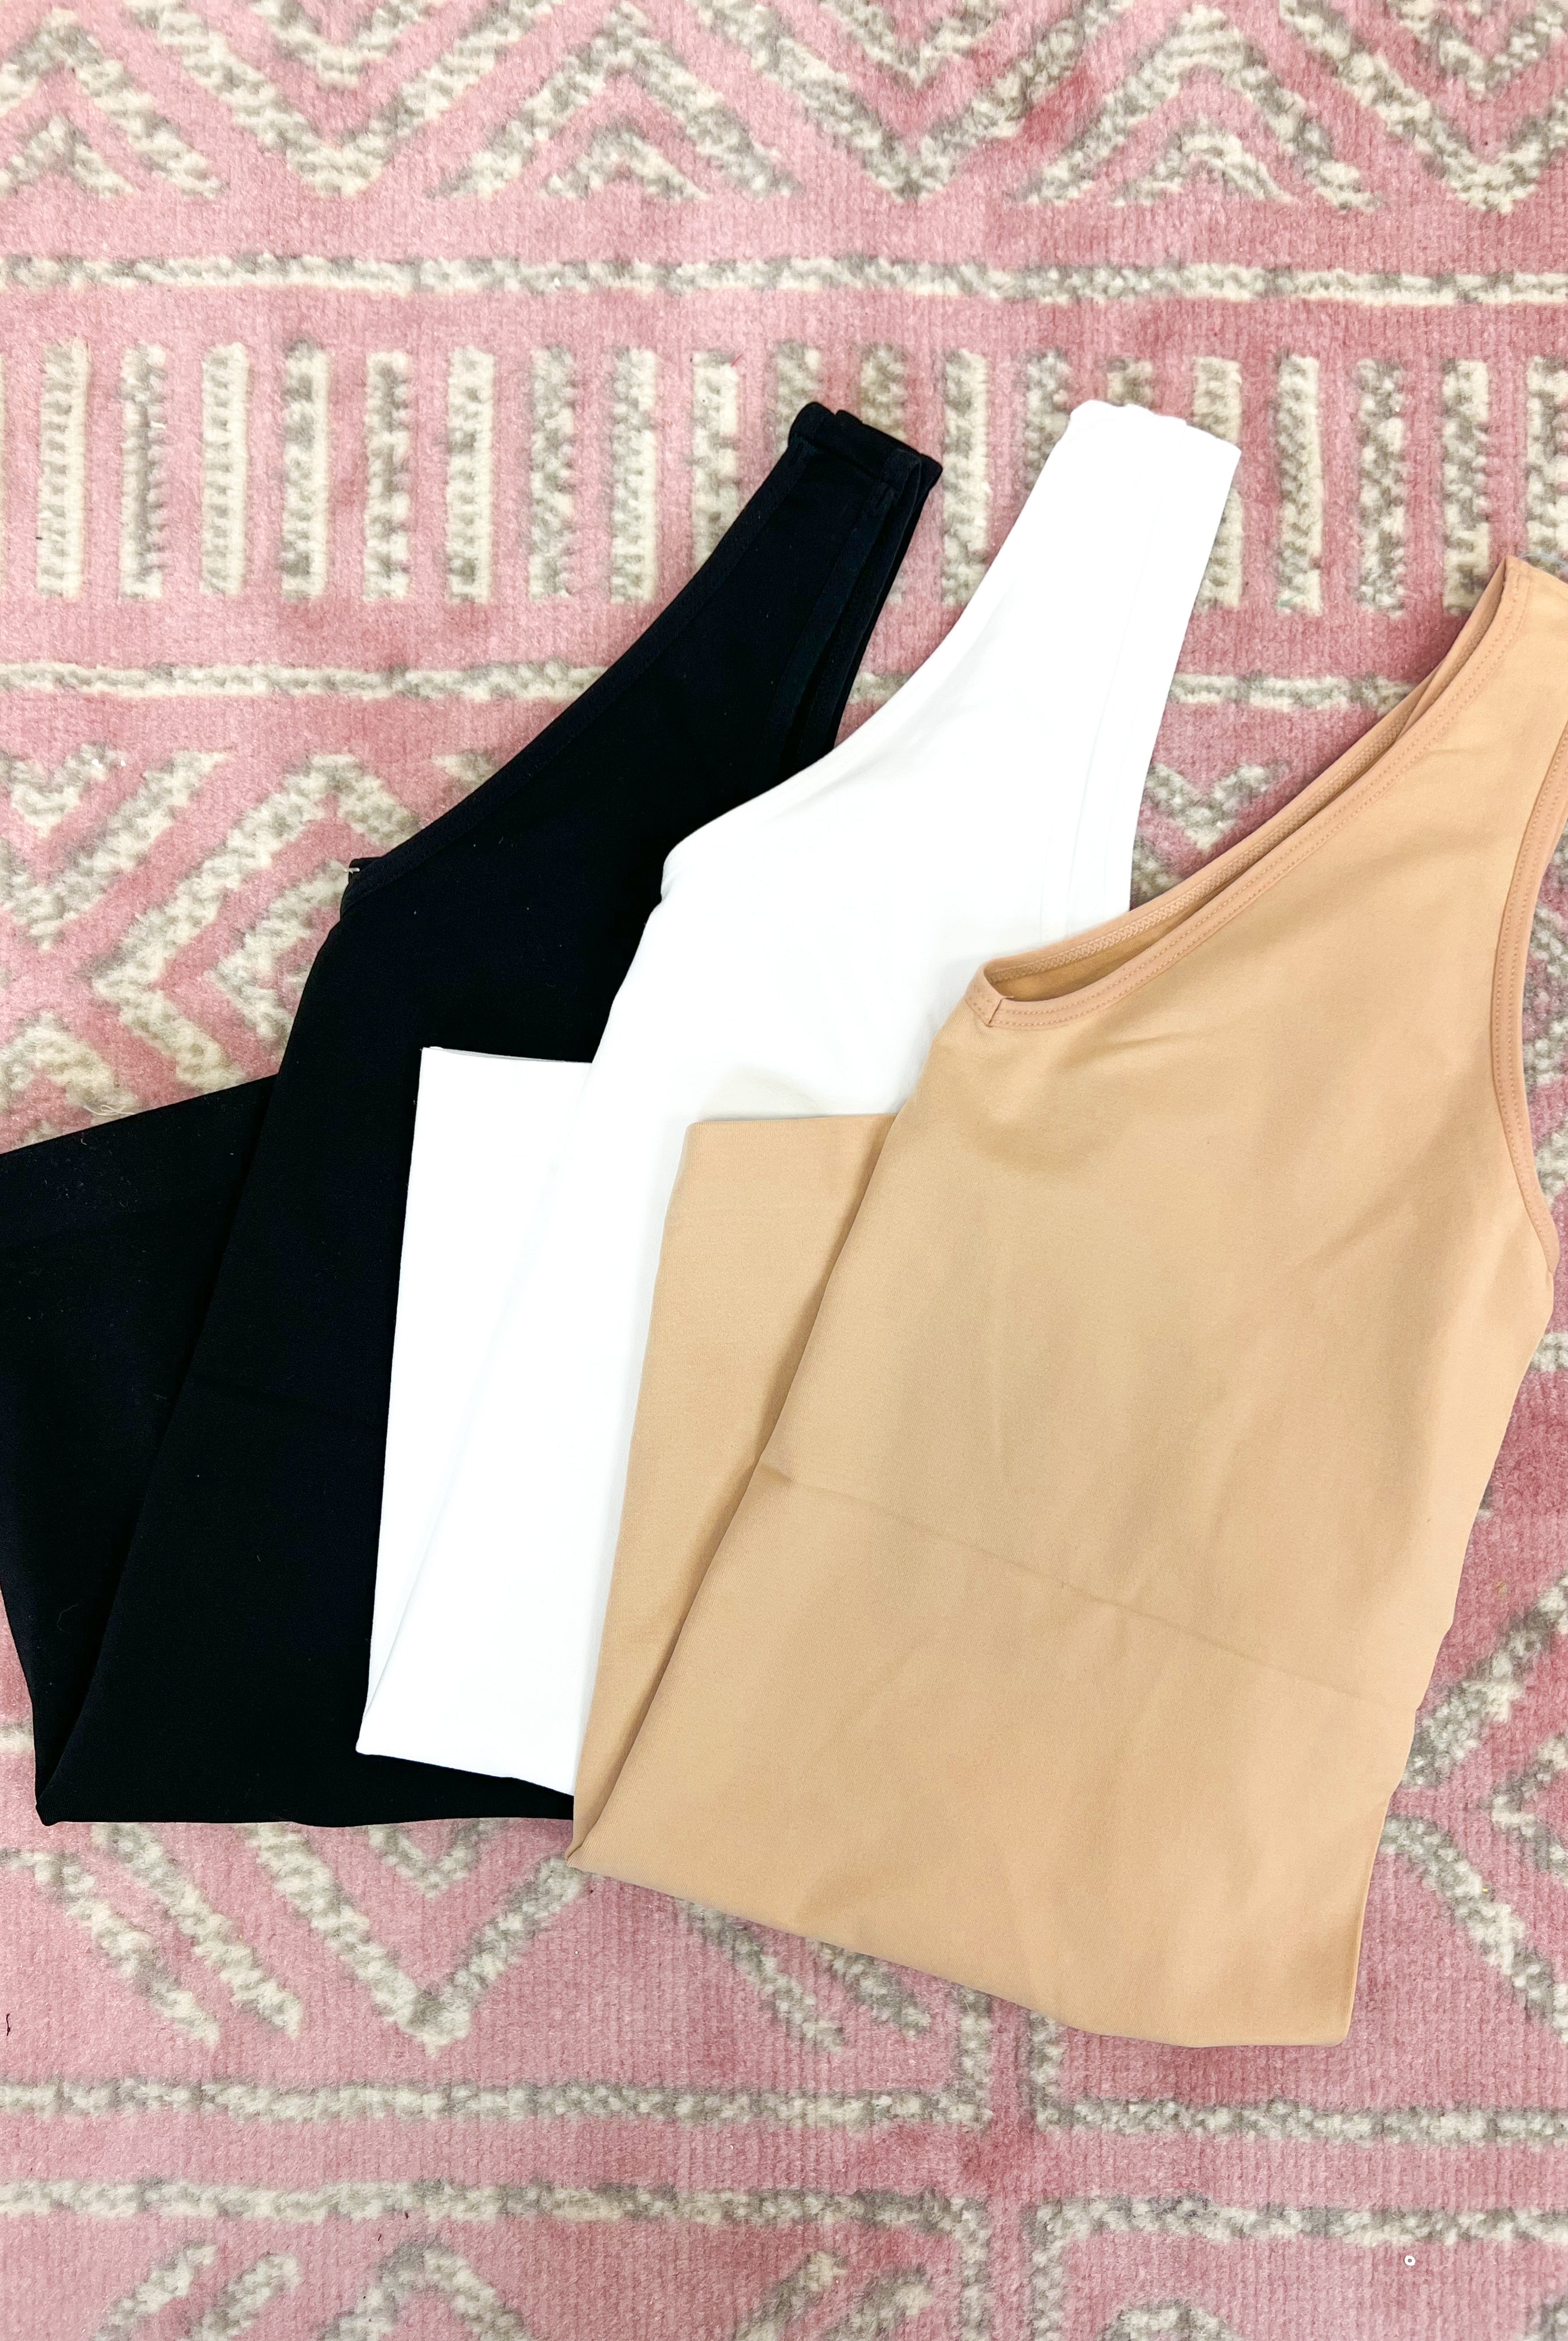 Reversible Tank-Tank Tops-The Lovely Closet-The Lovely Closet, Women's Fashion Boutique in Alexandria, KY